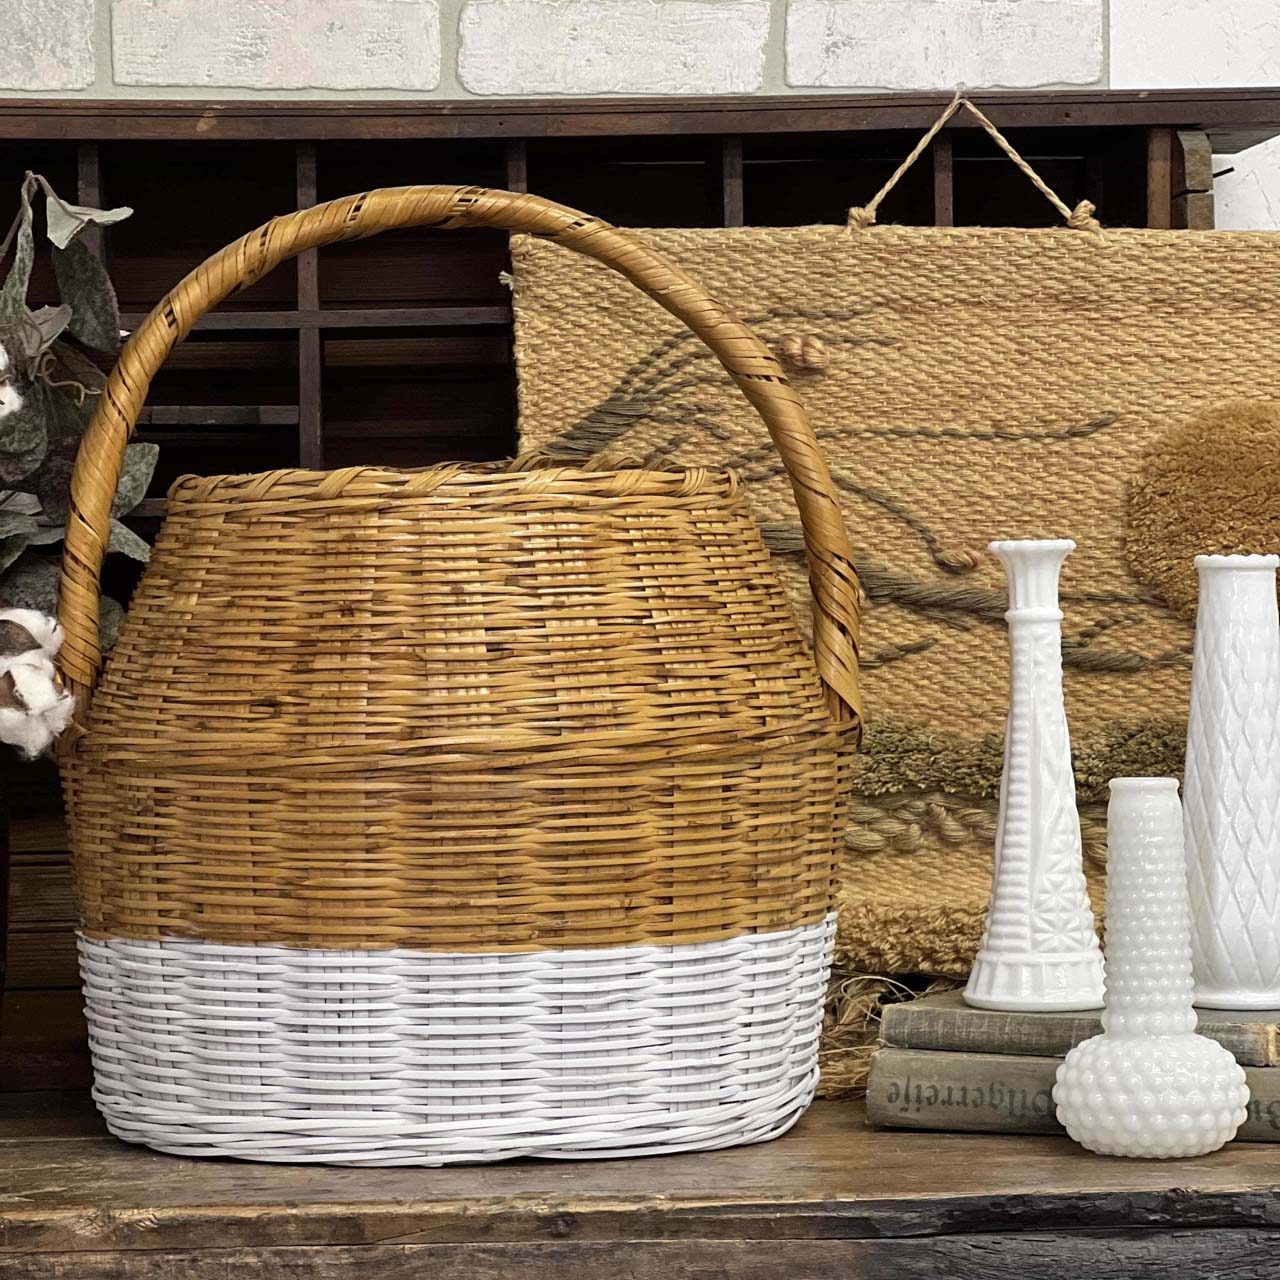 How to Paint an Old Basket